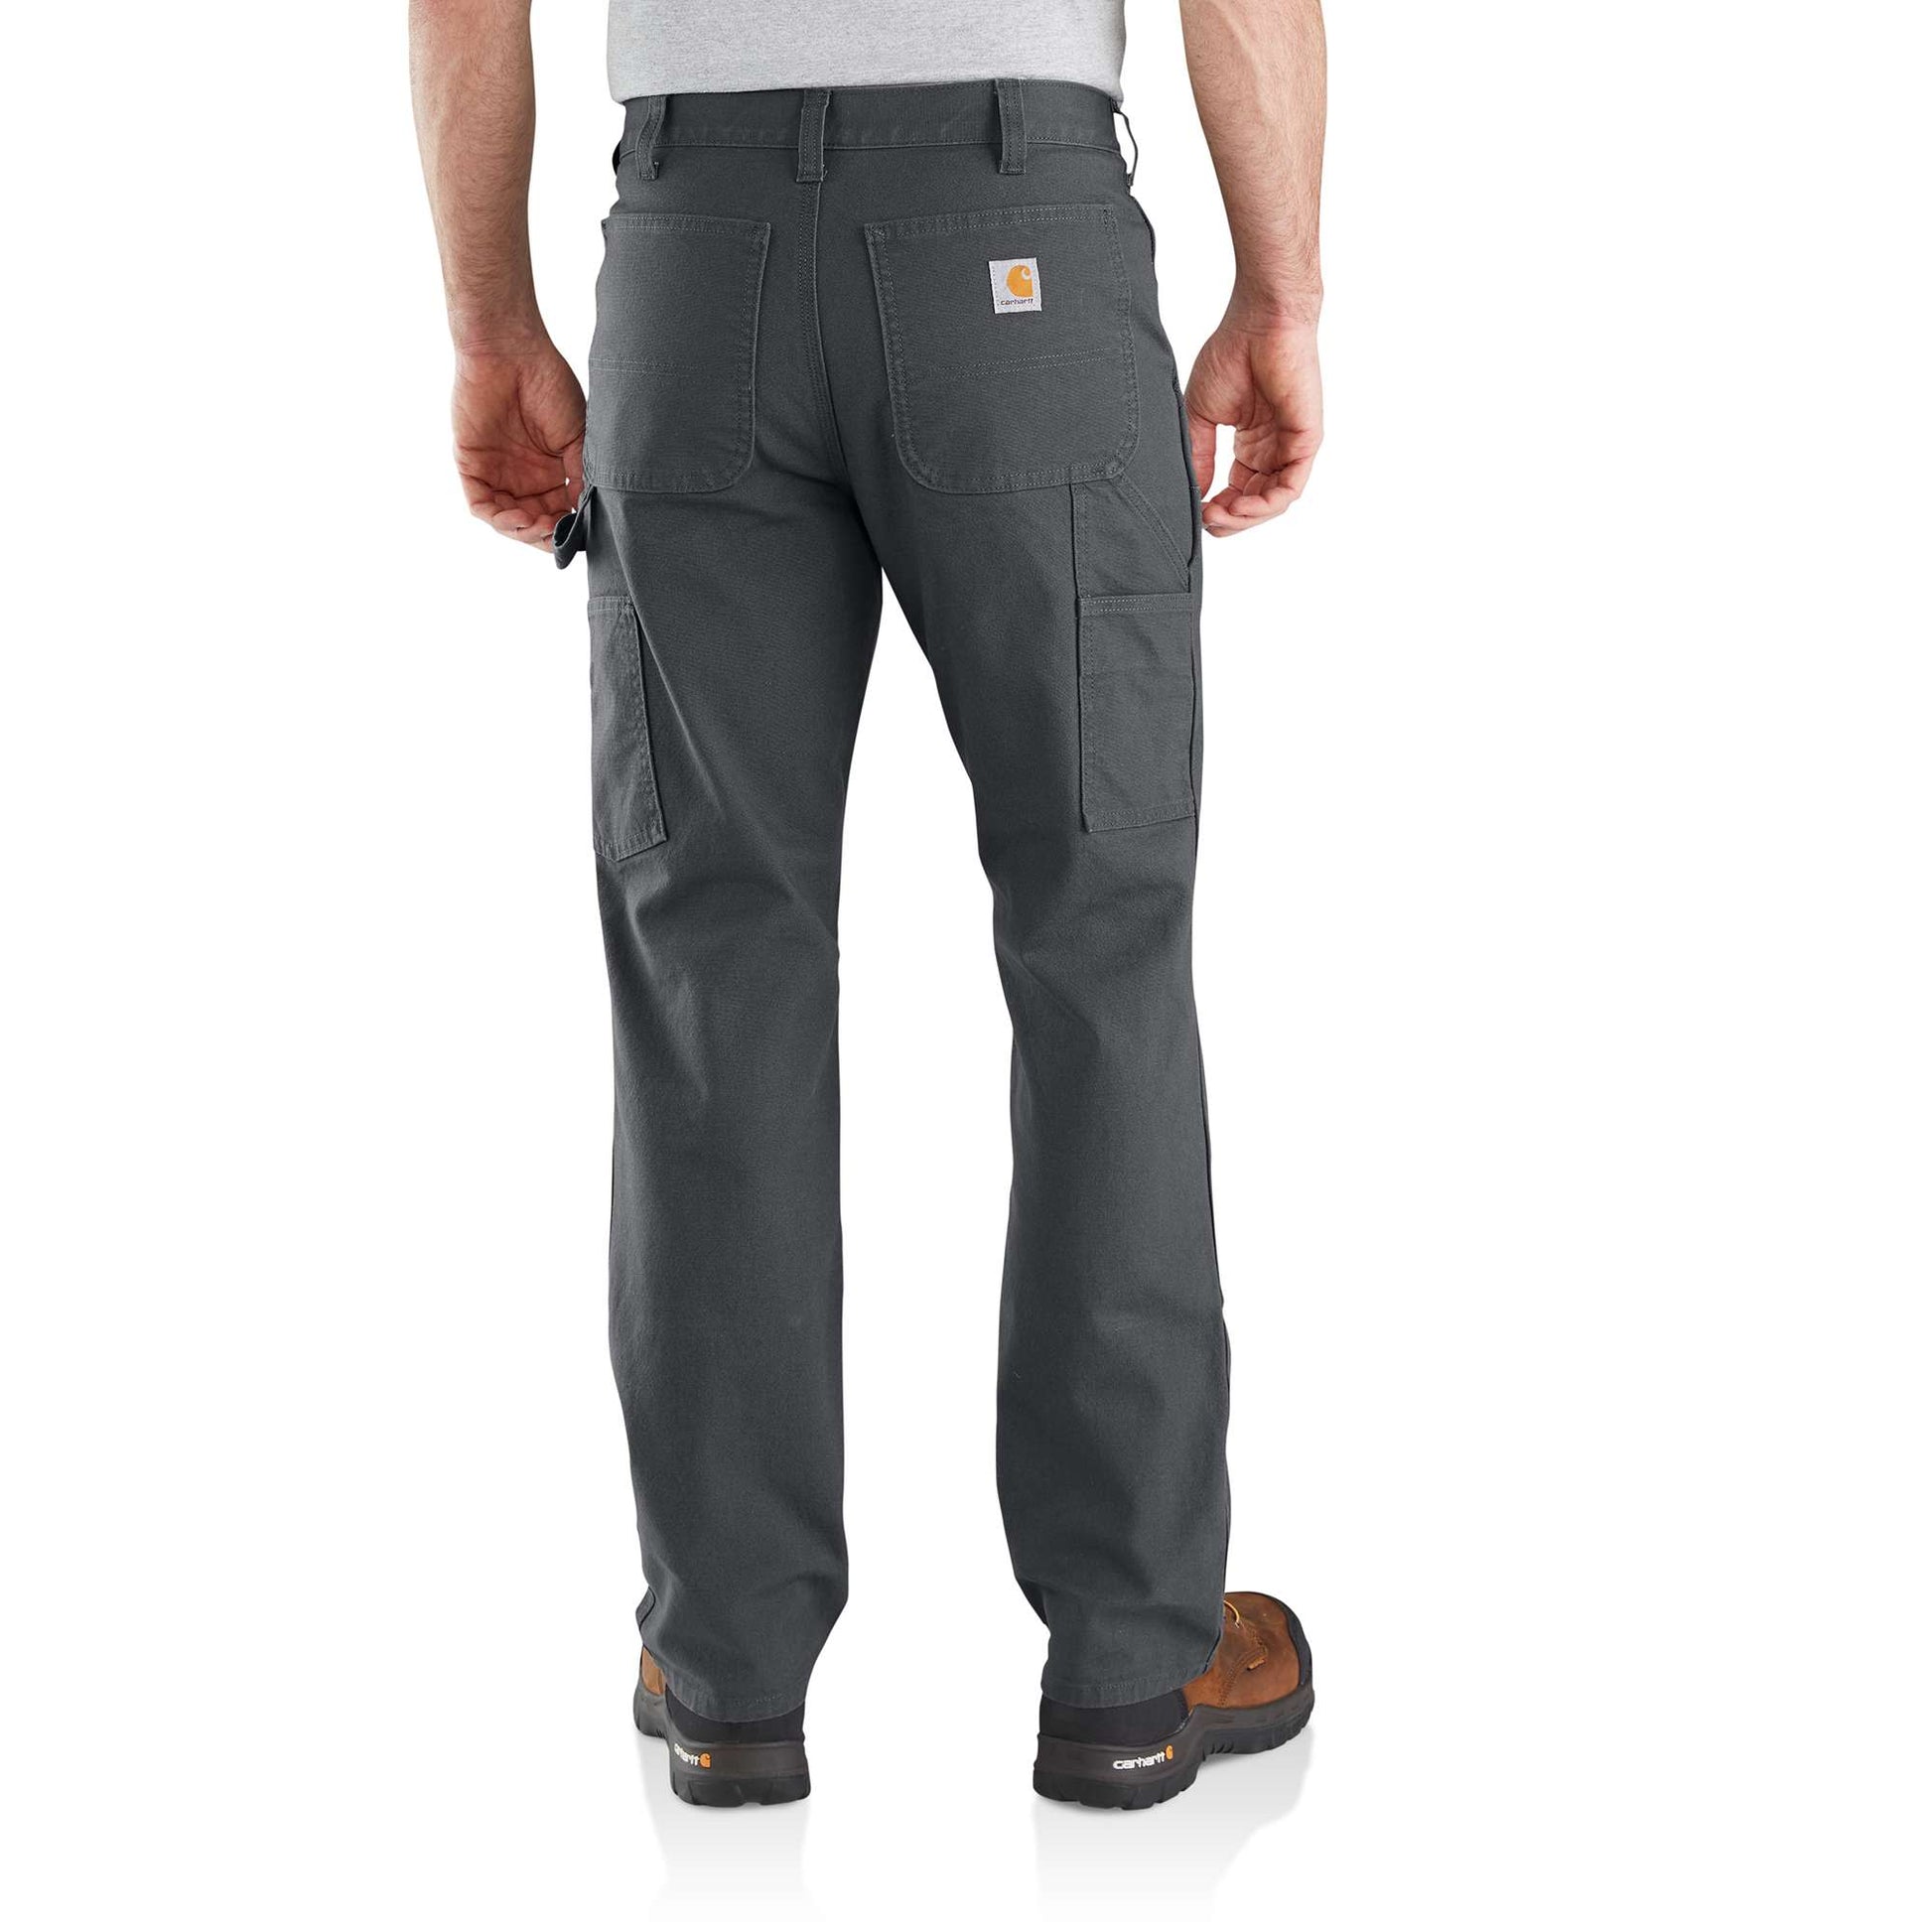 Carhartt Men's Rugged Flex Double-front Utility Work Pant